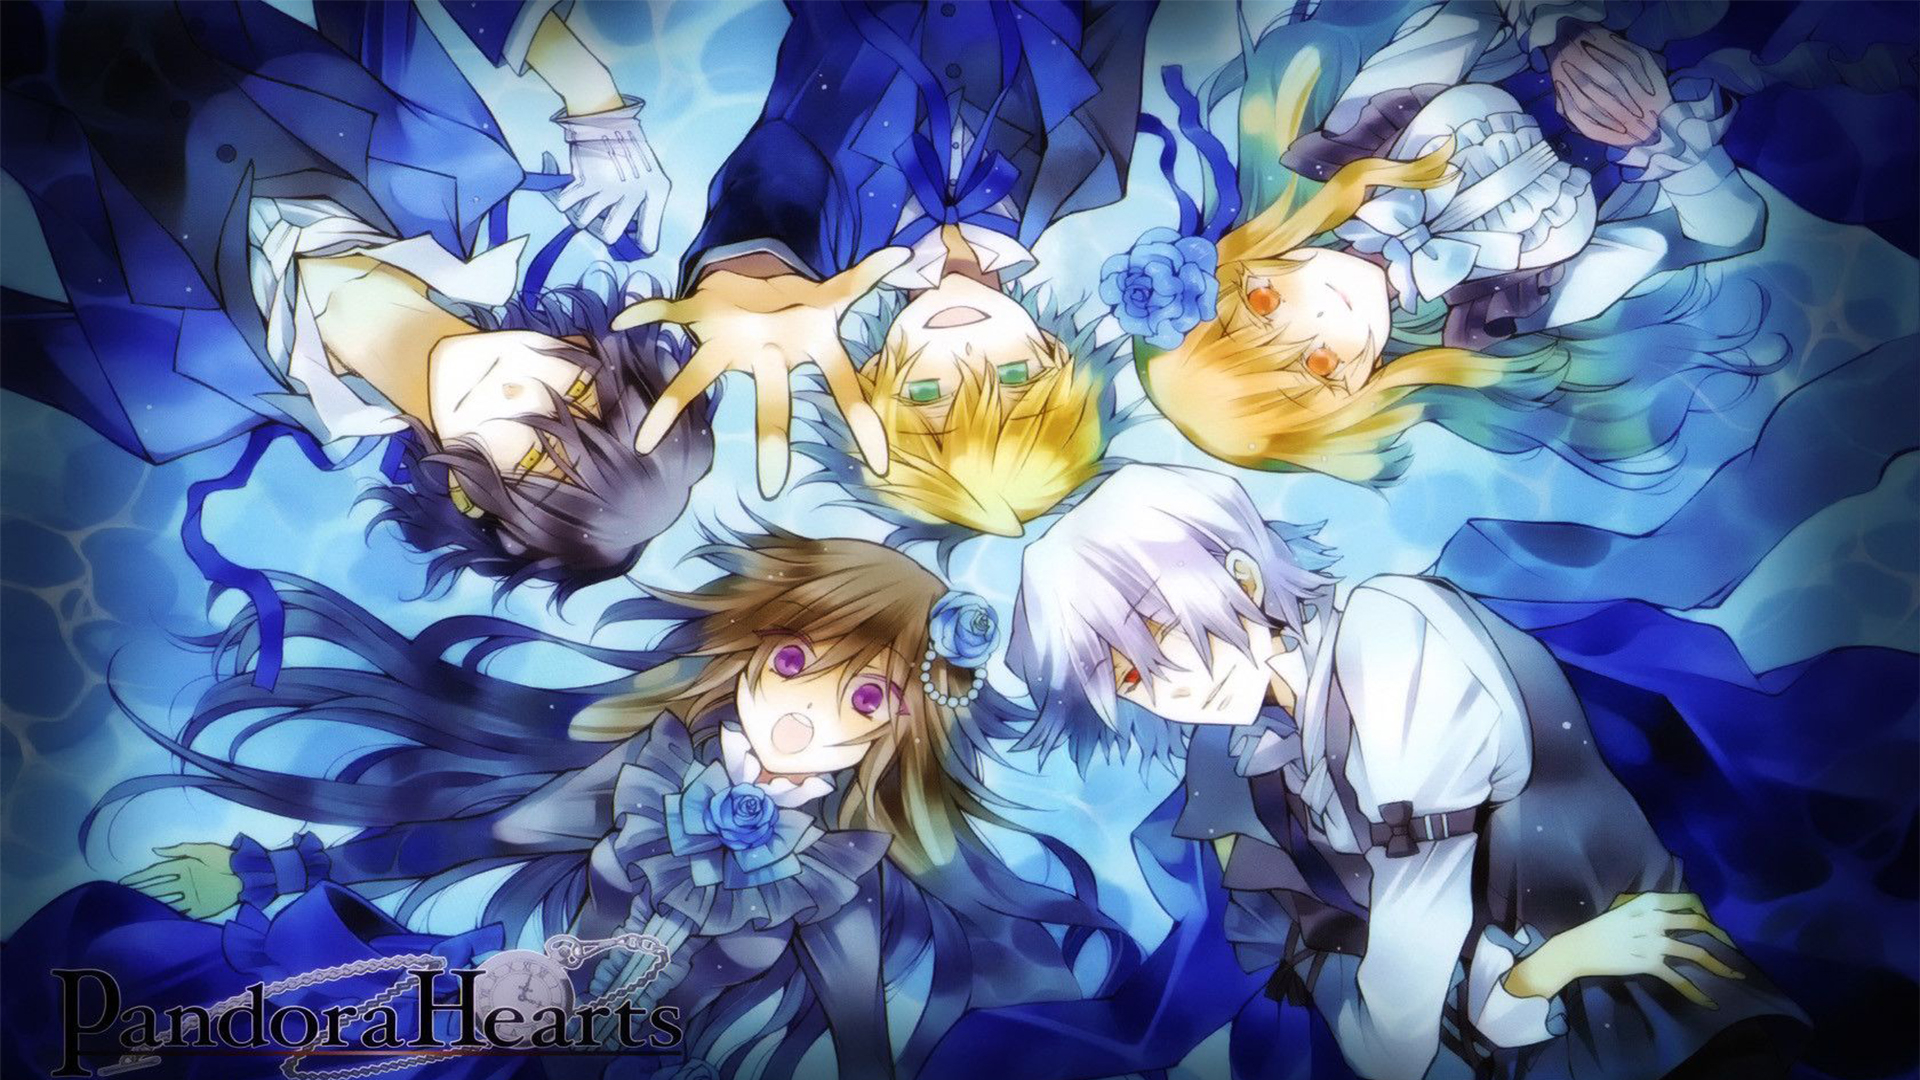 1920x1080 90+ Pandora Hearts HD Wallpapers and Backgrounds